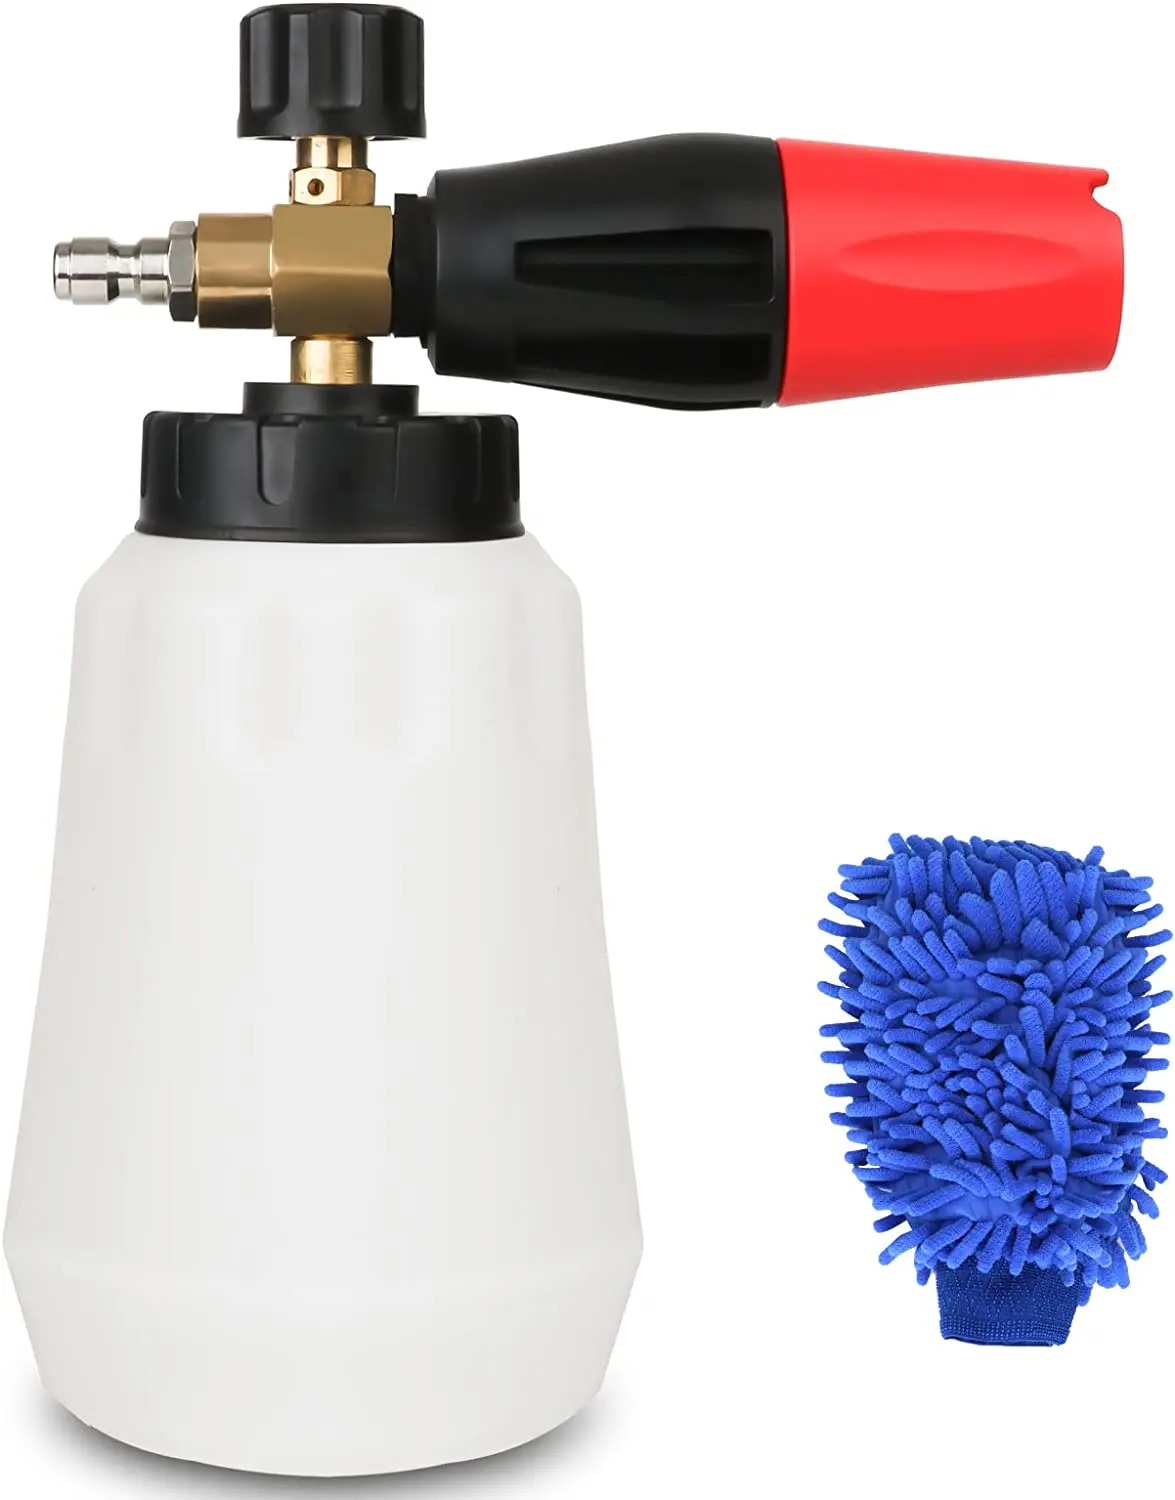 EVEAGE Foam Cannon, 1/4 Inch Quick Connector and 1 L Bottle for car wash